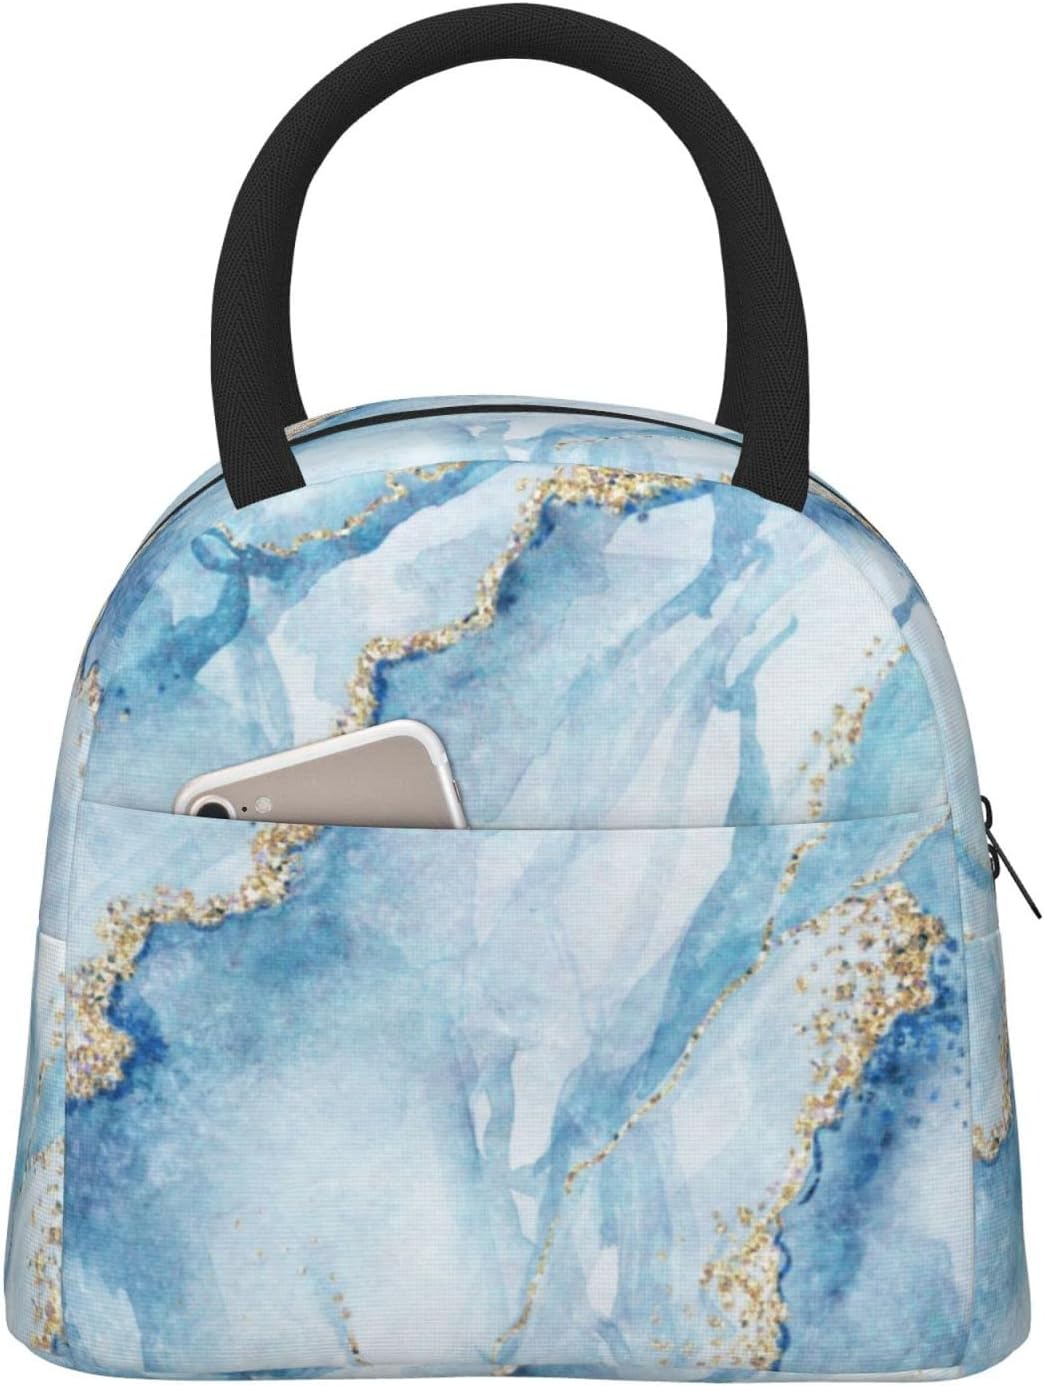 Fiokroo Lunch Bag Insulated Blue Marble With Gold Yellow Marbling Texture Lunch Box Reusable Lunch Tote Bag For School Work College Outdoor Travel Picnic, 10l